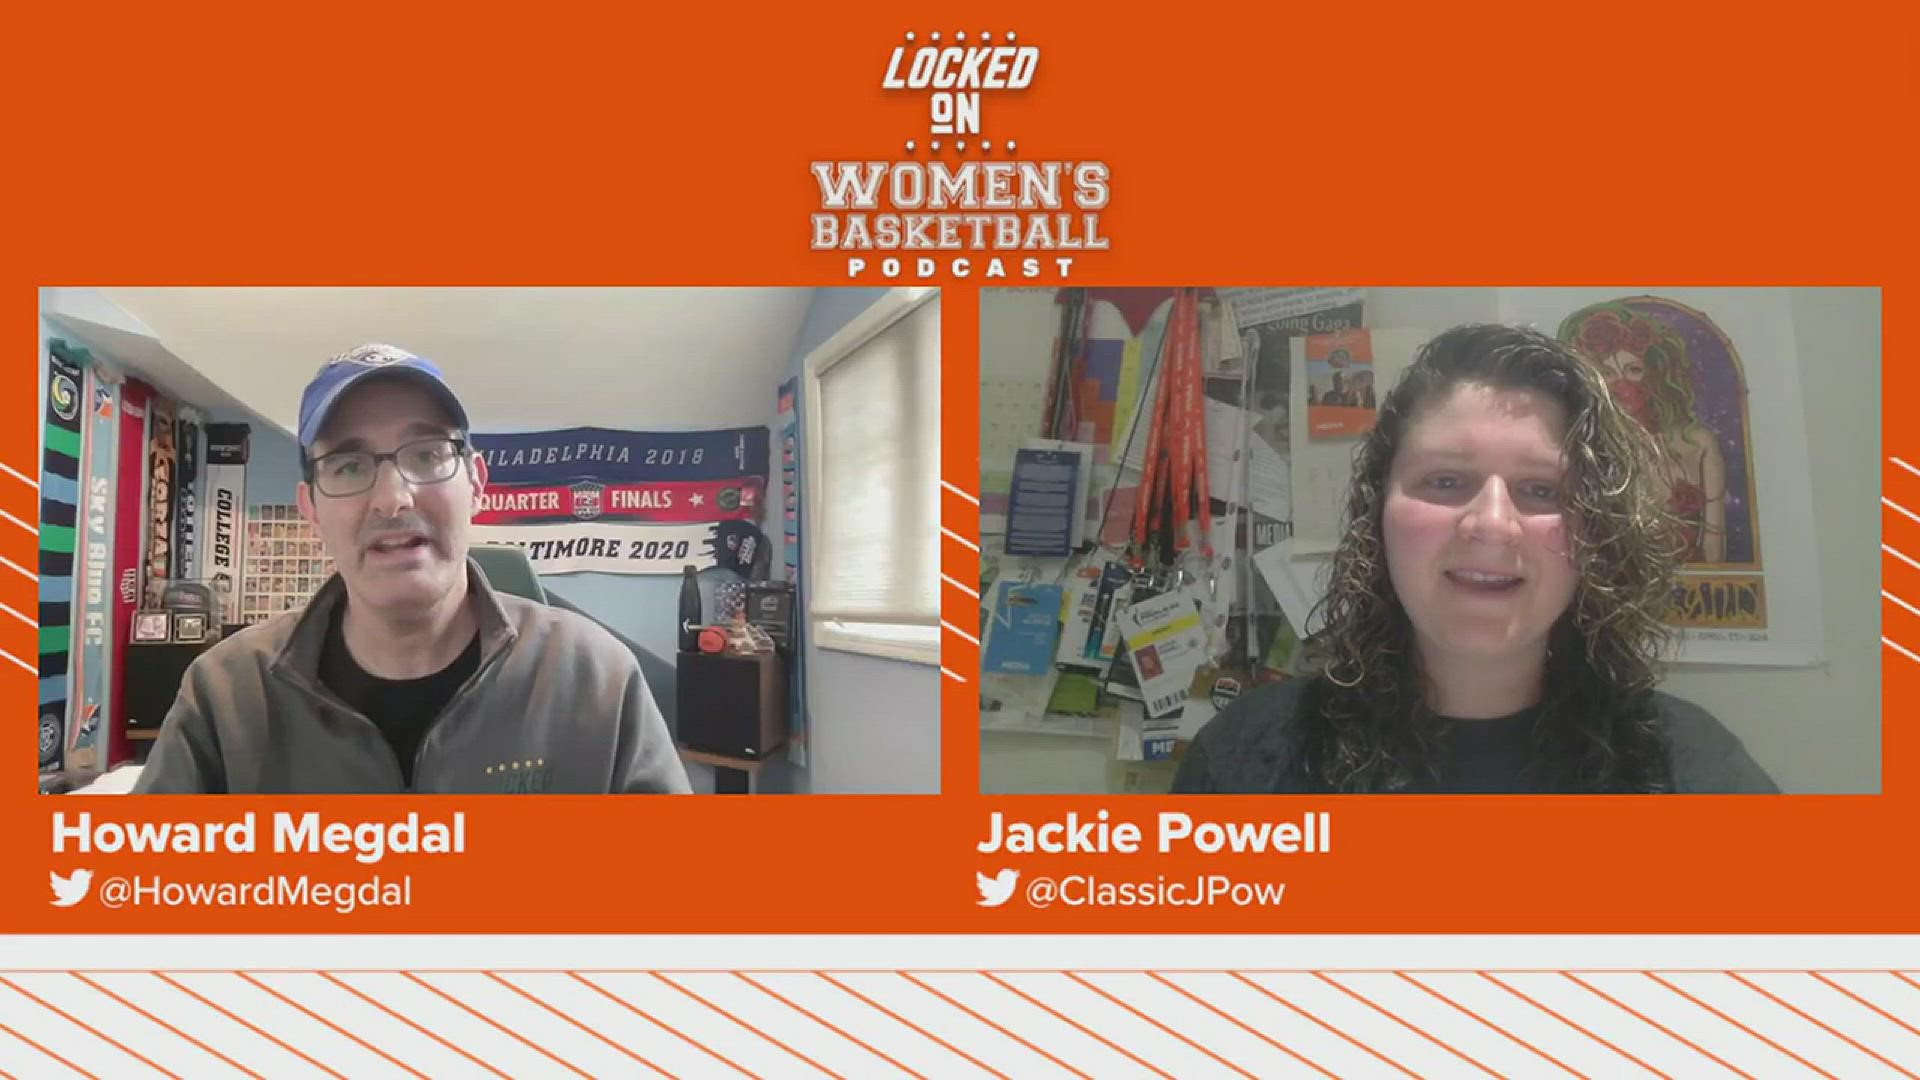 Howard Megdal, who broke the details of the three-team trade that sent Jonquel Jones to the New York Liberty, is joined by Jackie Powell.